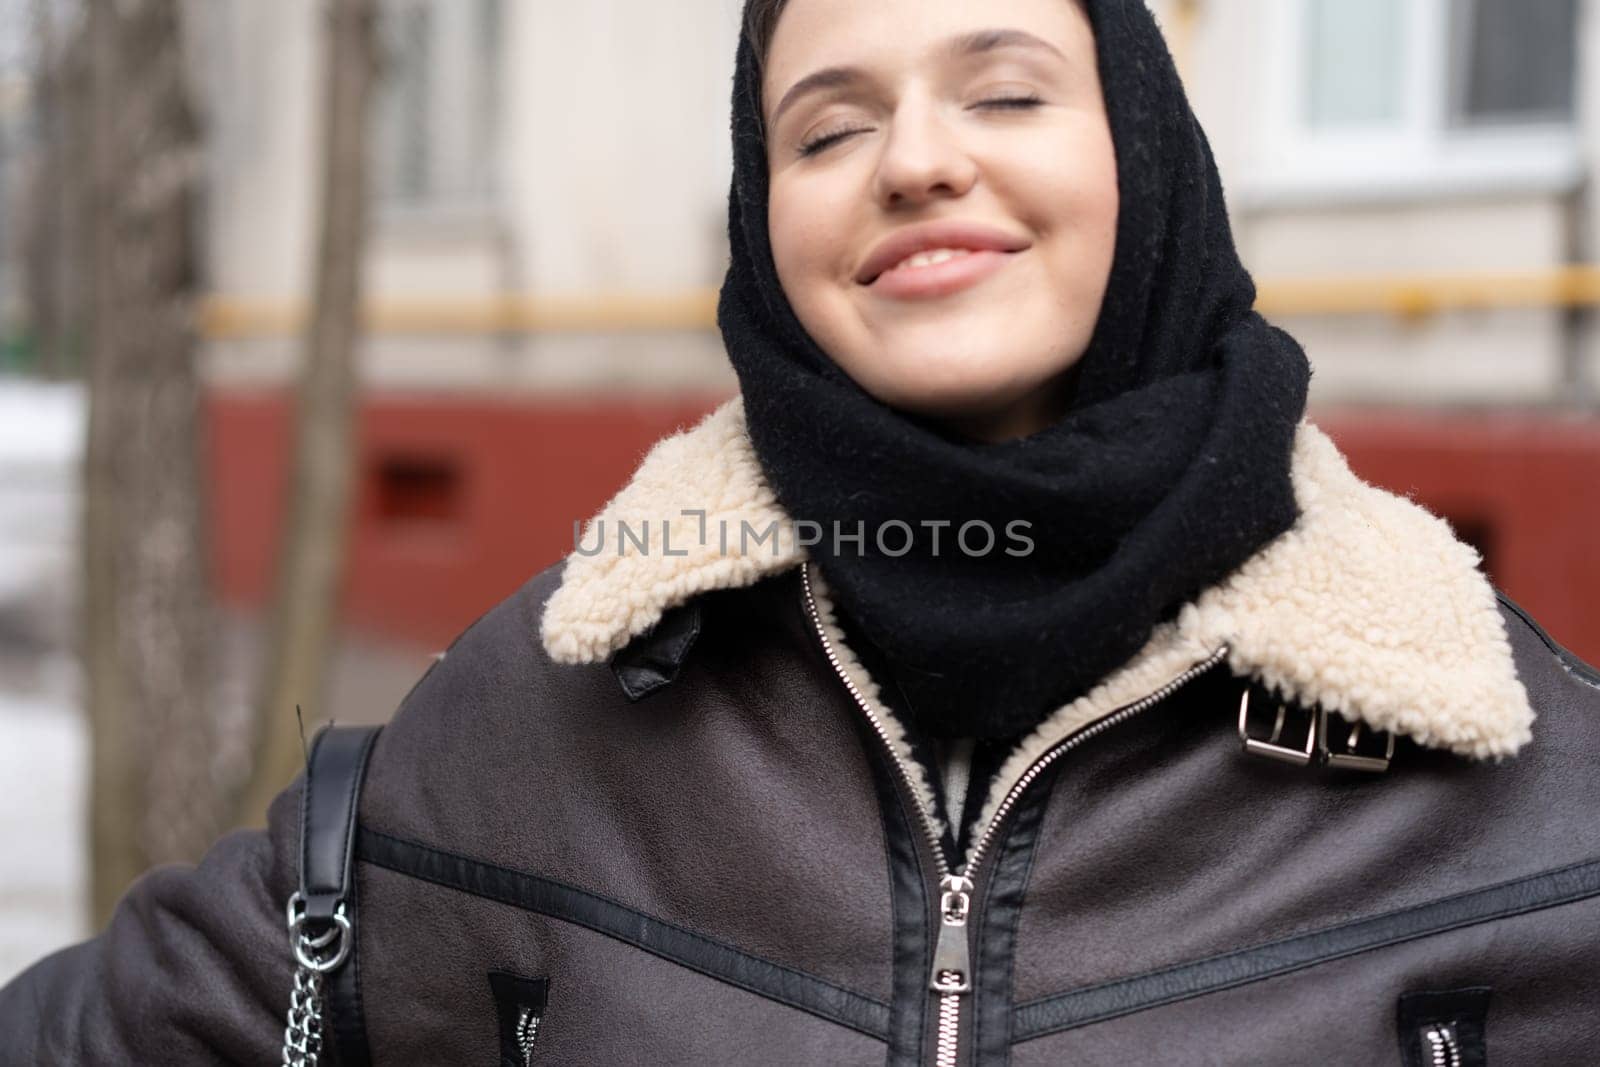 portrait of a young beautiful woman in a headscarf in winter outside